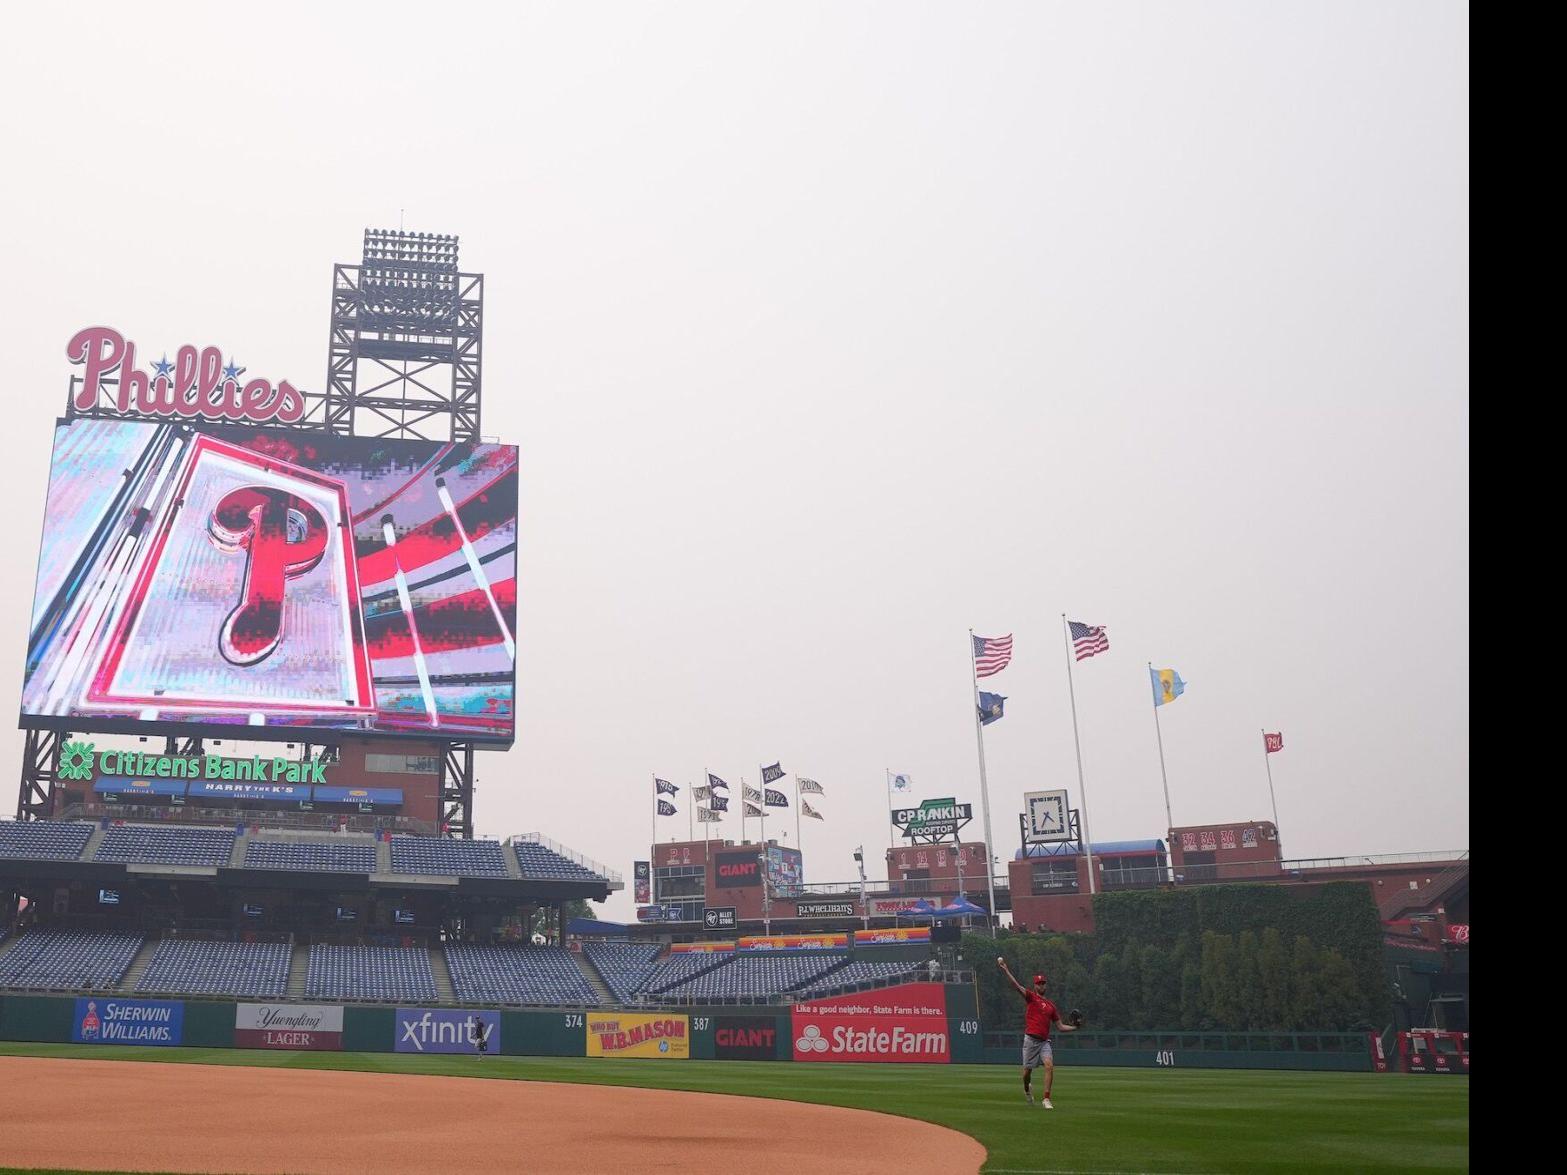 Washington Nationals game postponed due to hazardous air quality in DC from  wildfire smoke